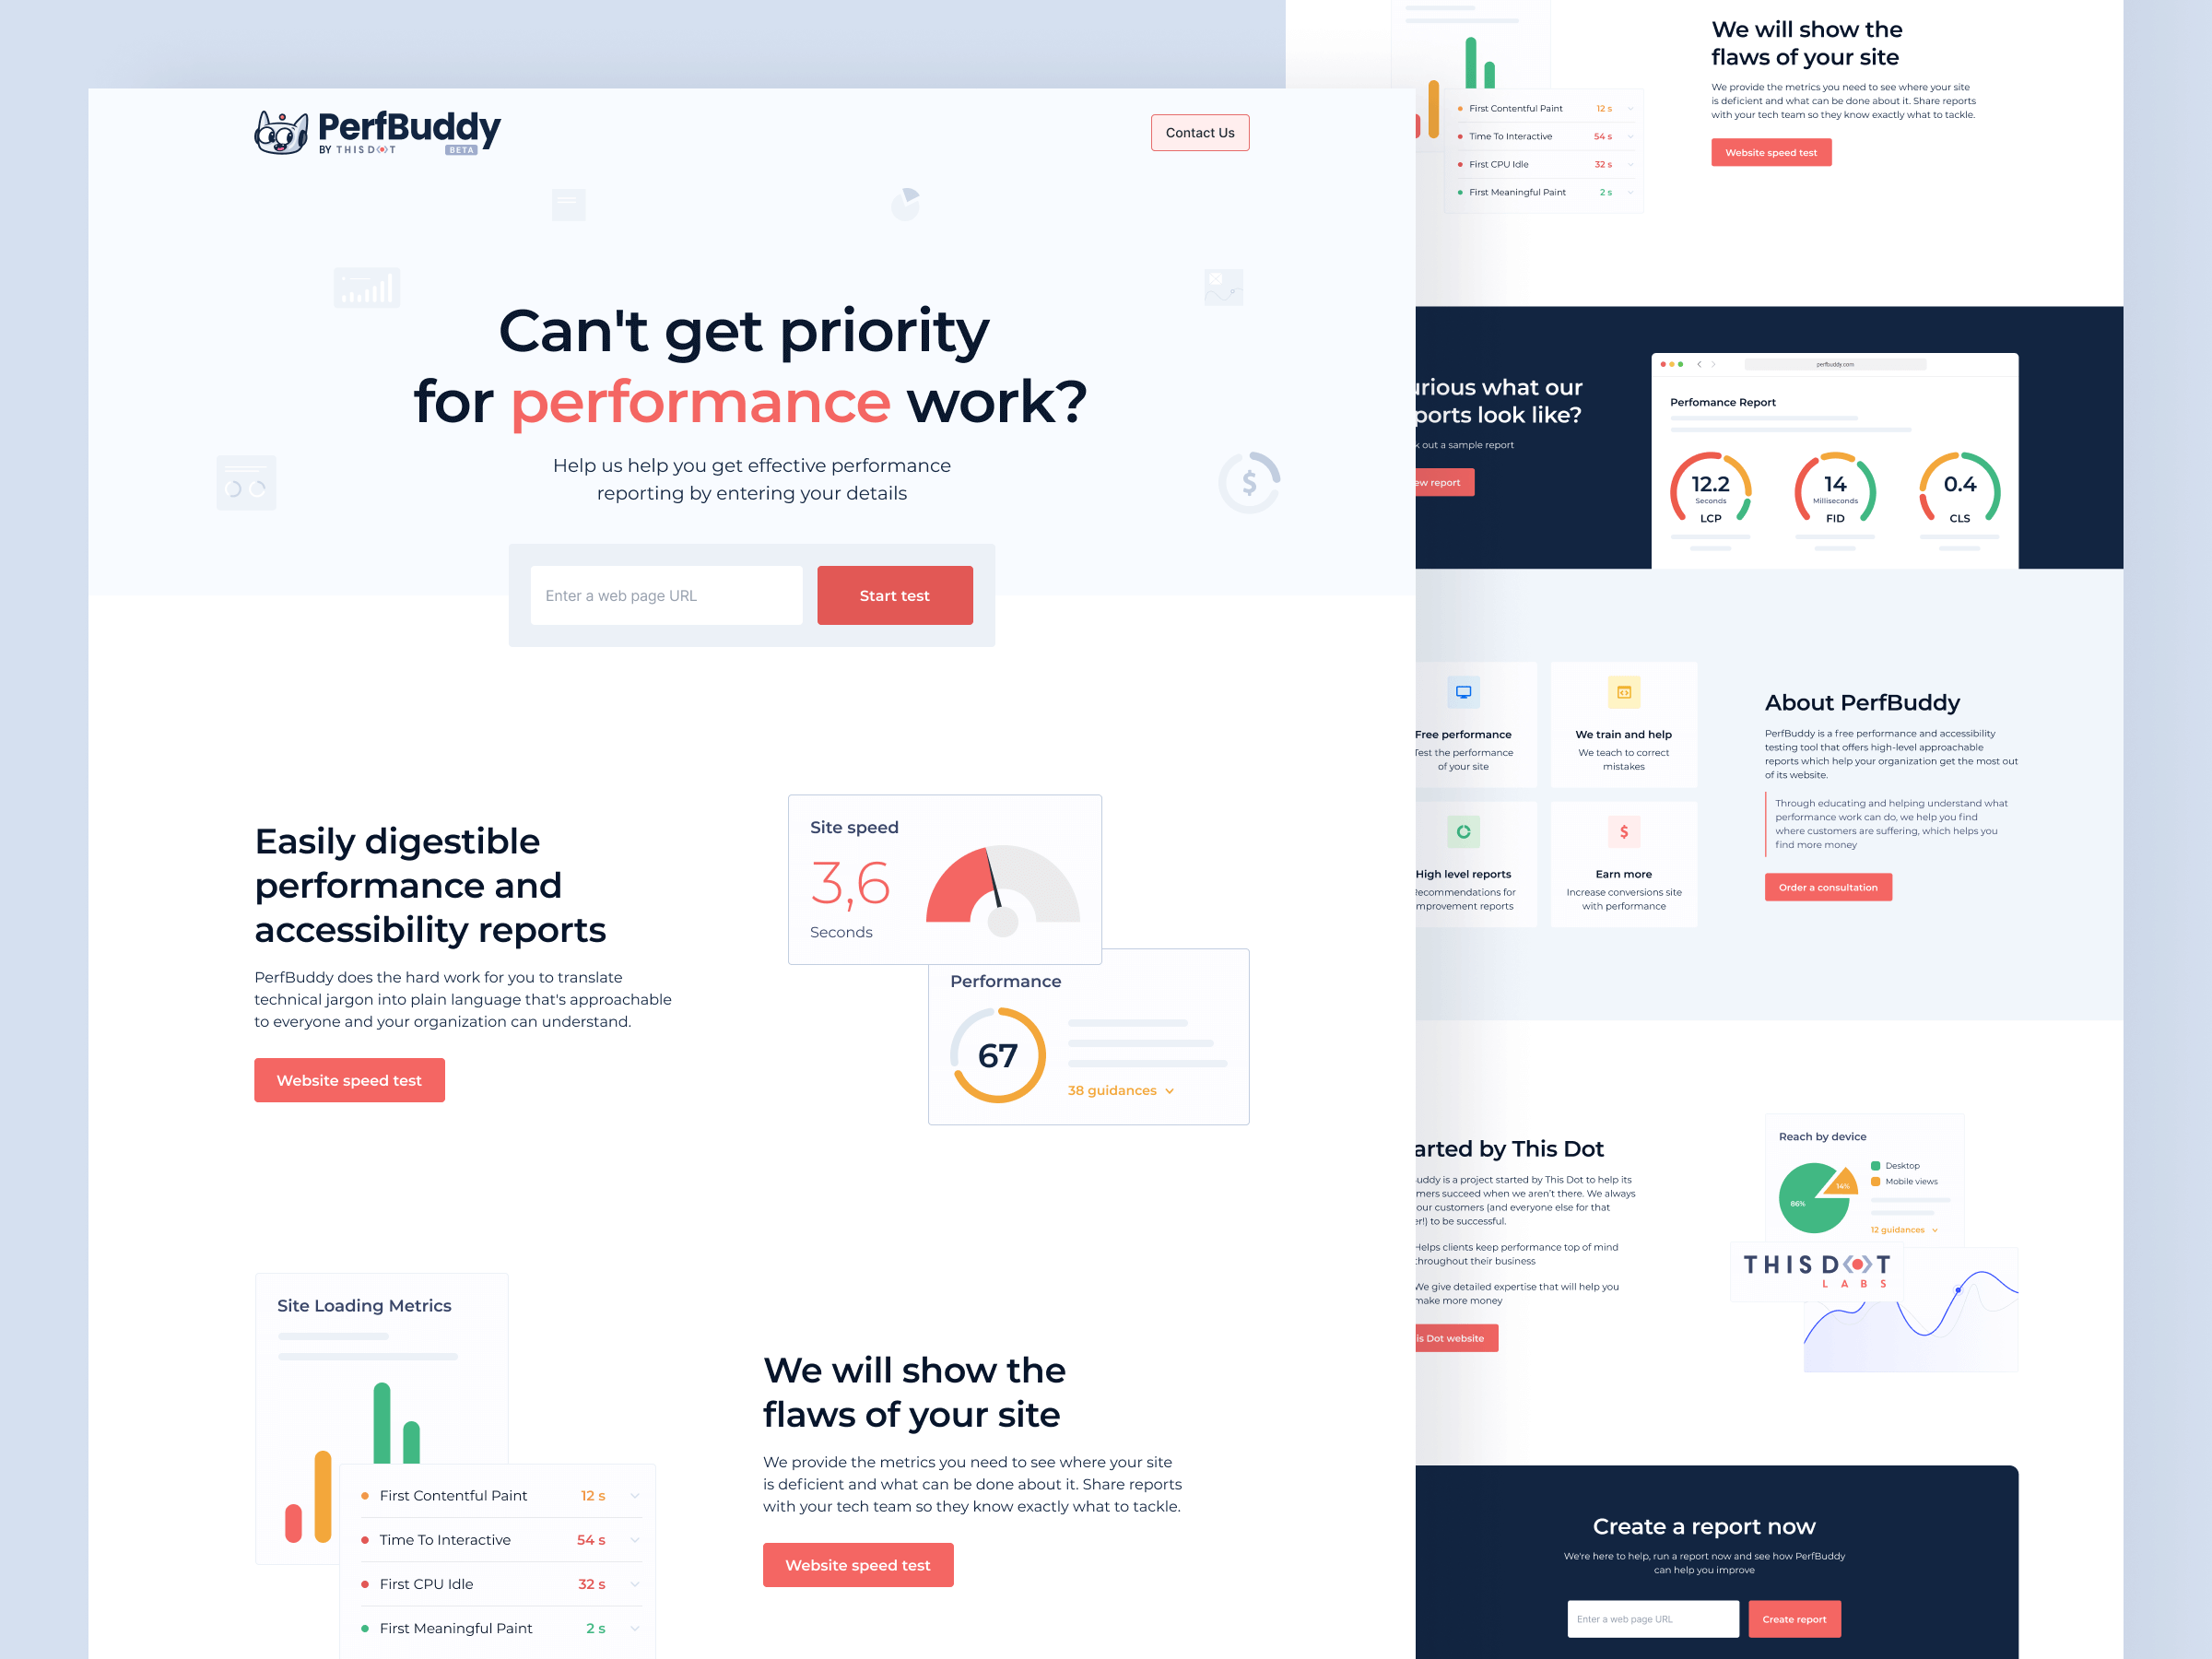 Landing page displaying different web app features